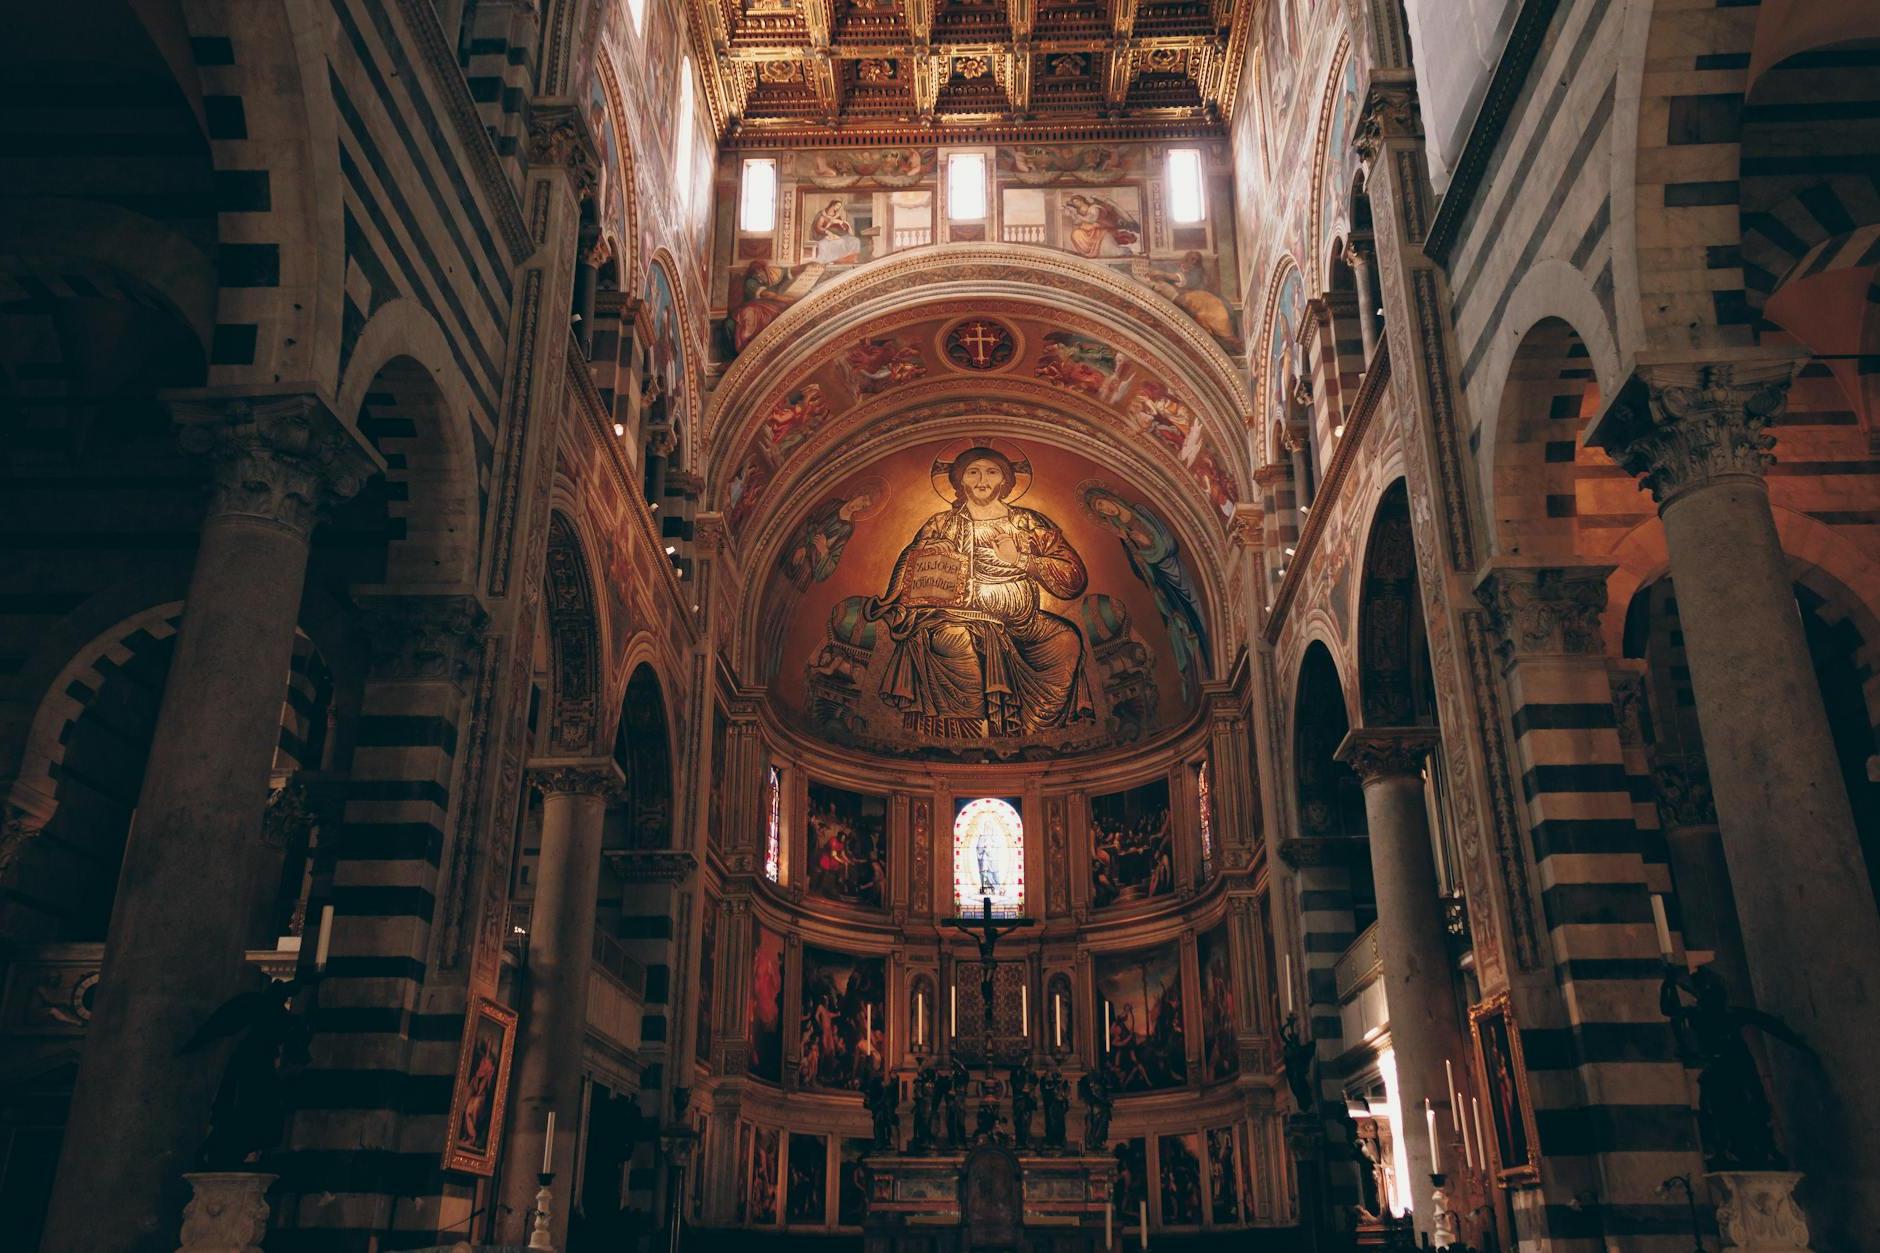 The inside of a cathedral with a large altar